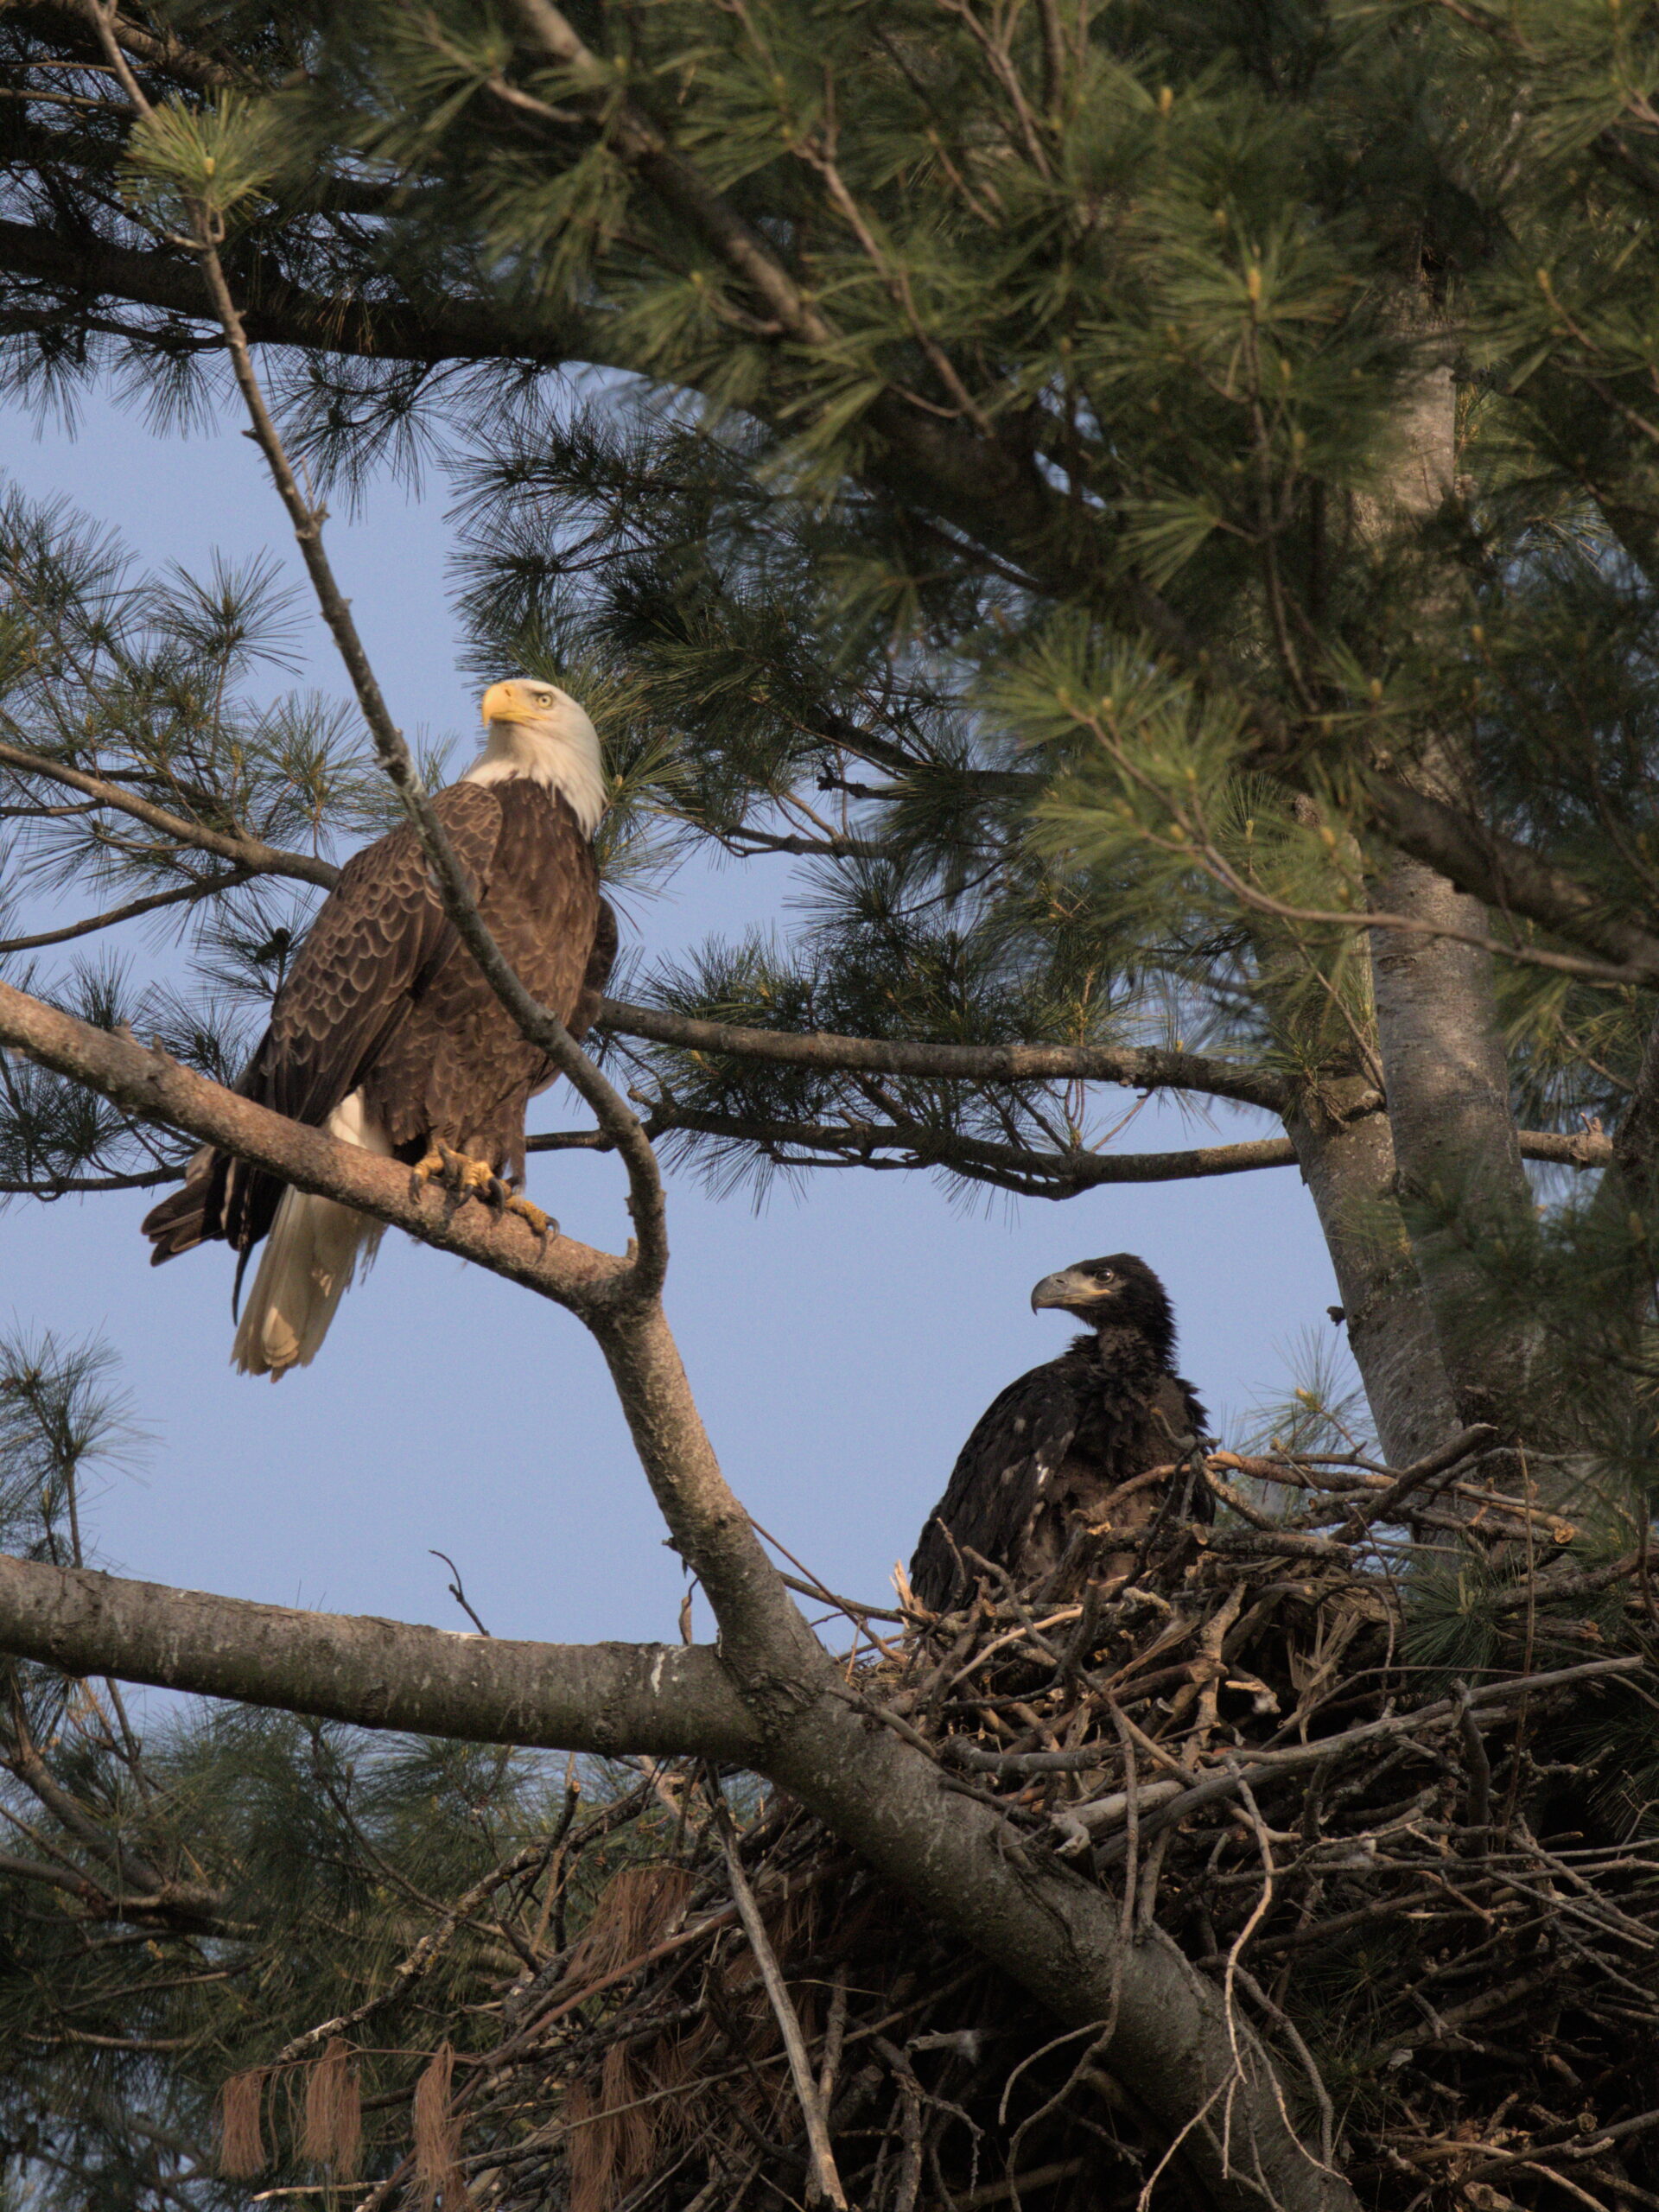 Bald eagle and older chick seen in a nest